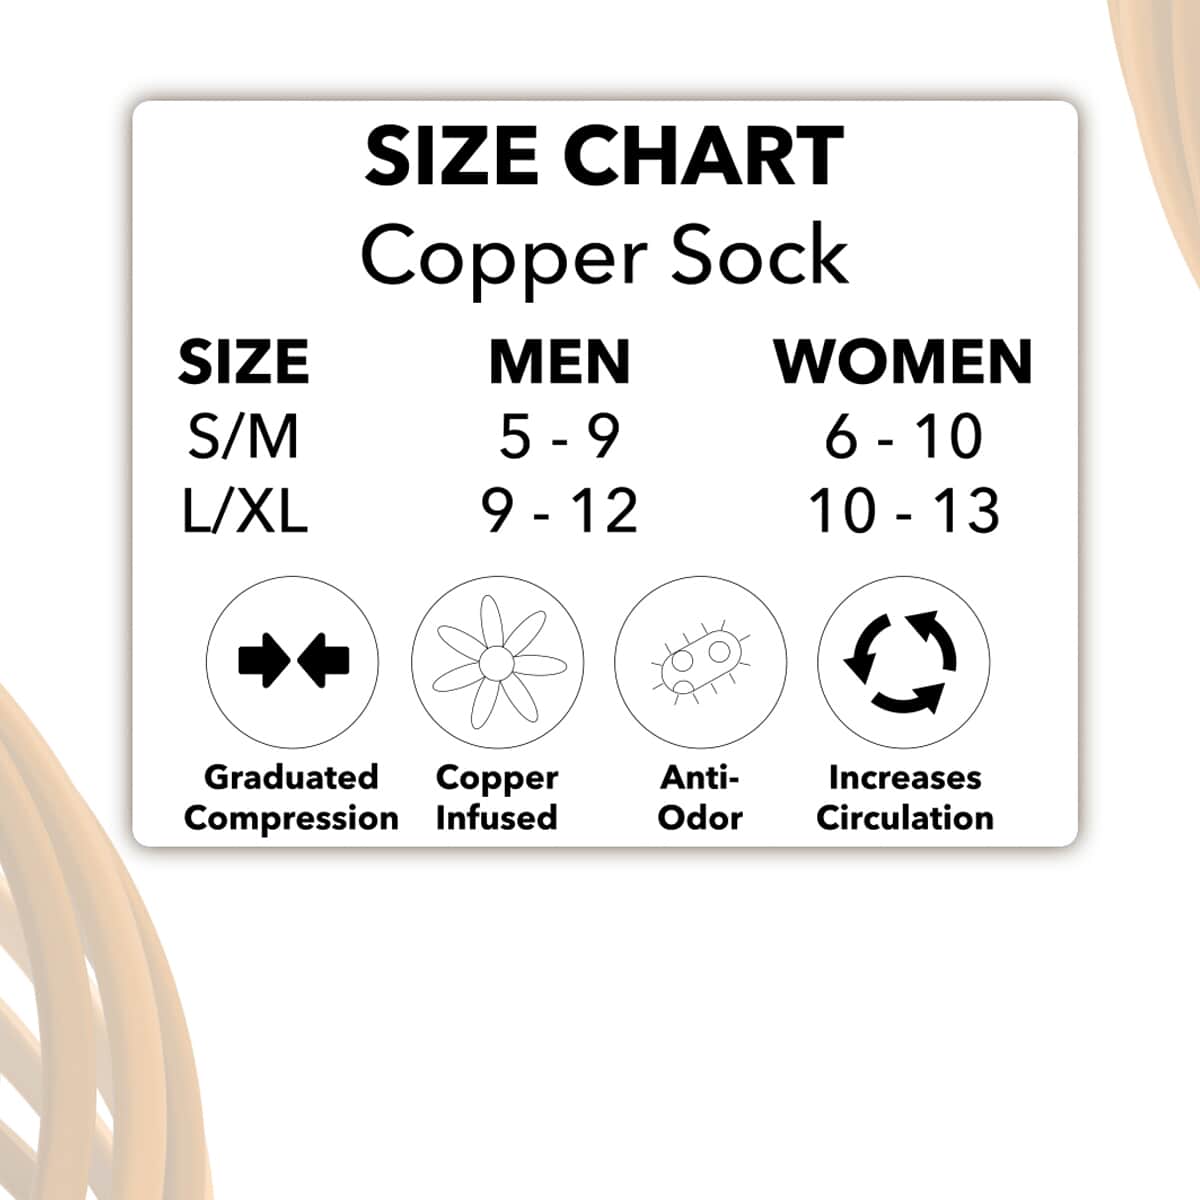 Set of 4 Pairs of Ankle Length Odor Free Copper Compression Socks For Men And Women, Premium Material Moisture Wicking Unisex Copper Infused Socks - Black (L/XL) image number 6